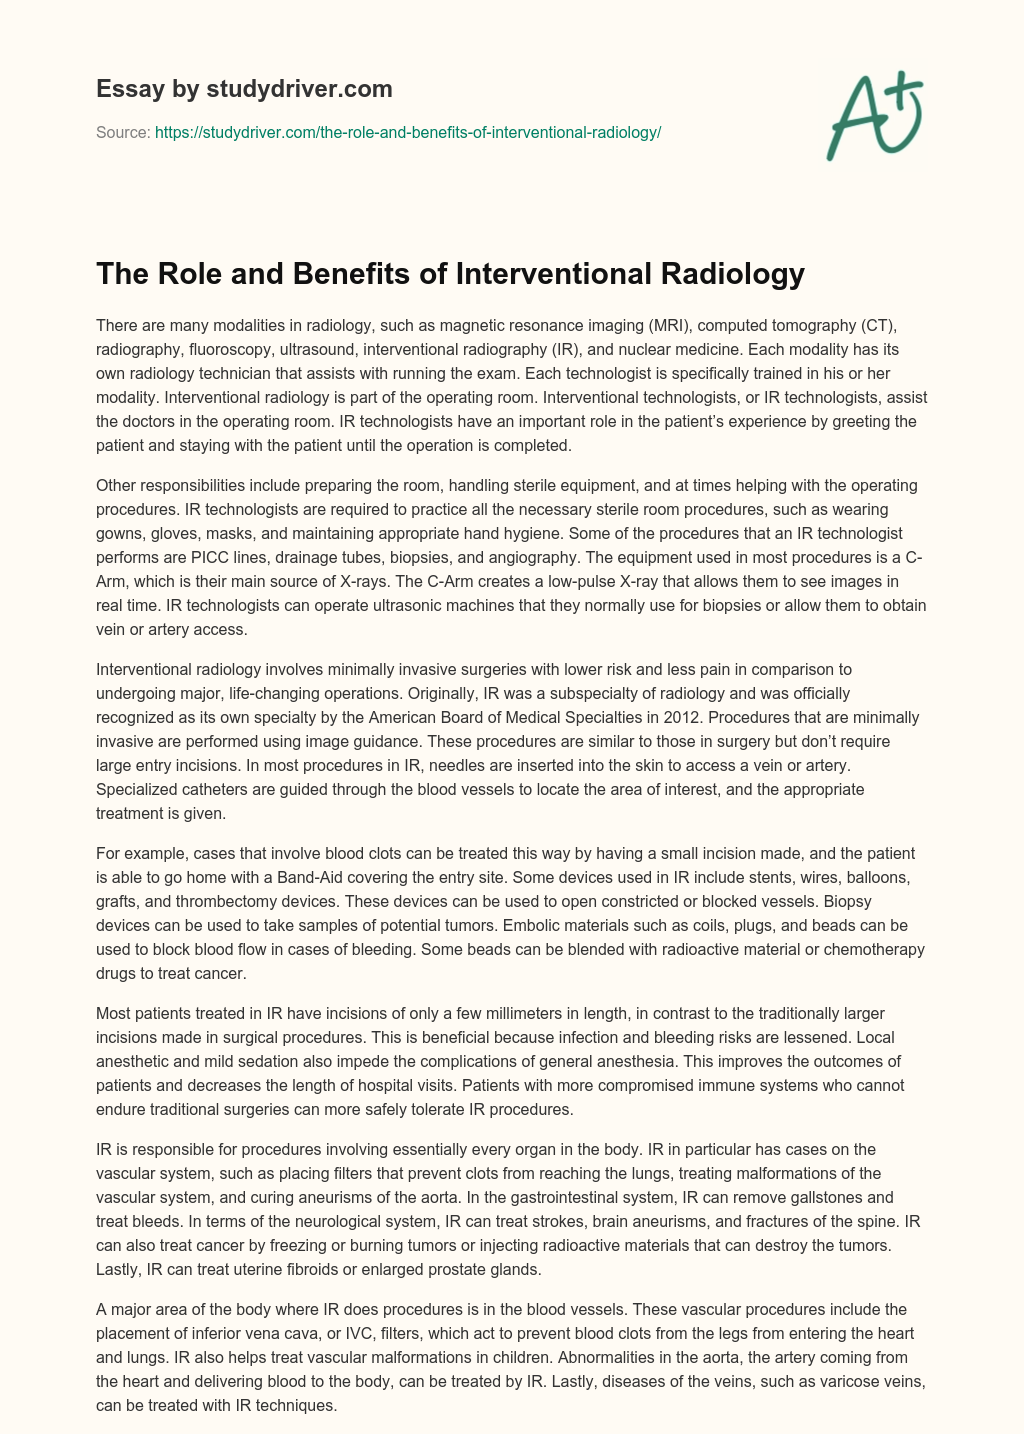 The Role and Benefits of Interventional Radiology essay